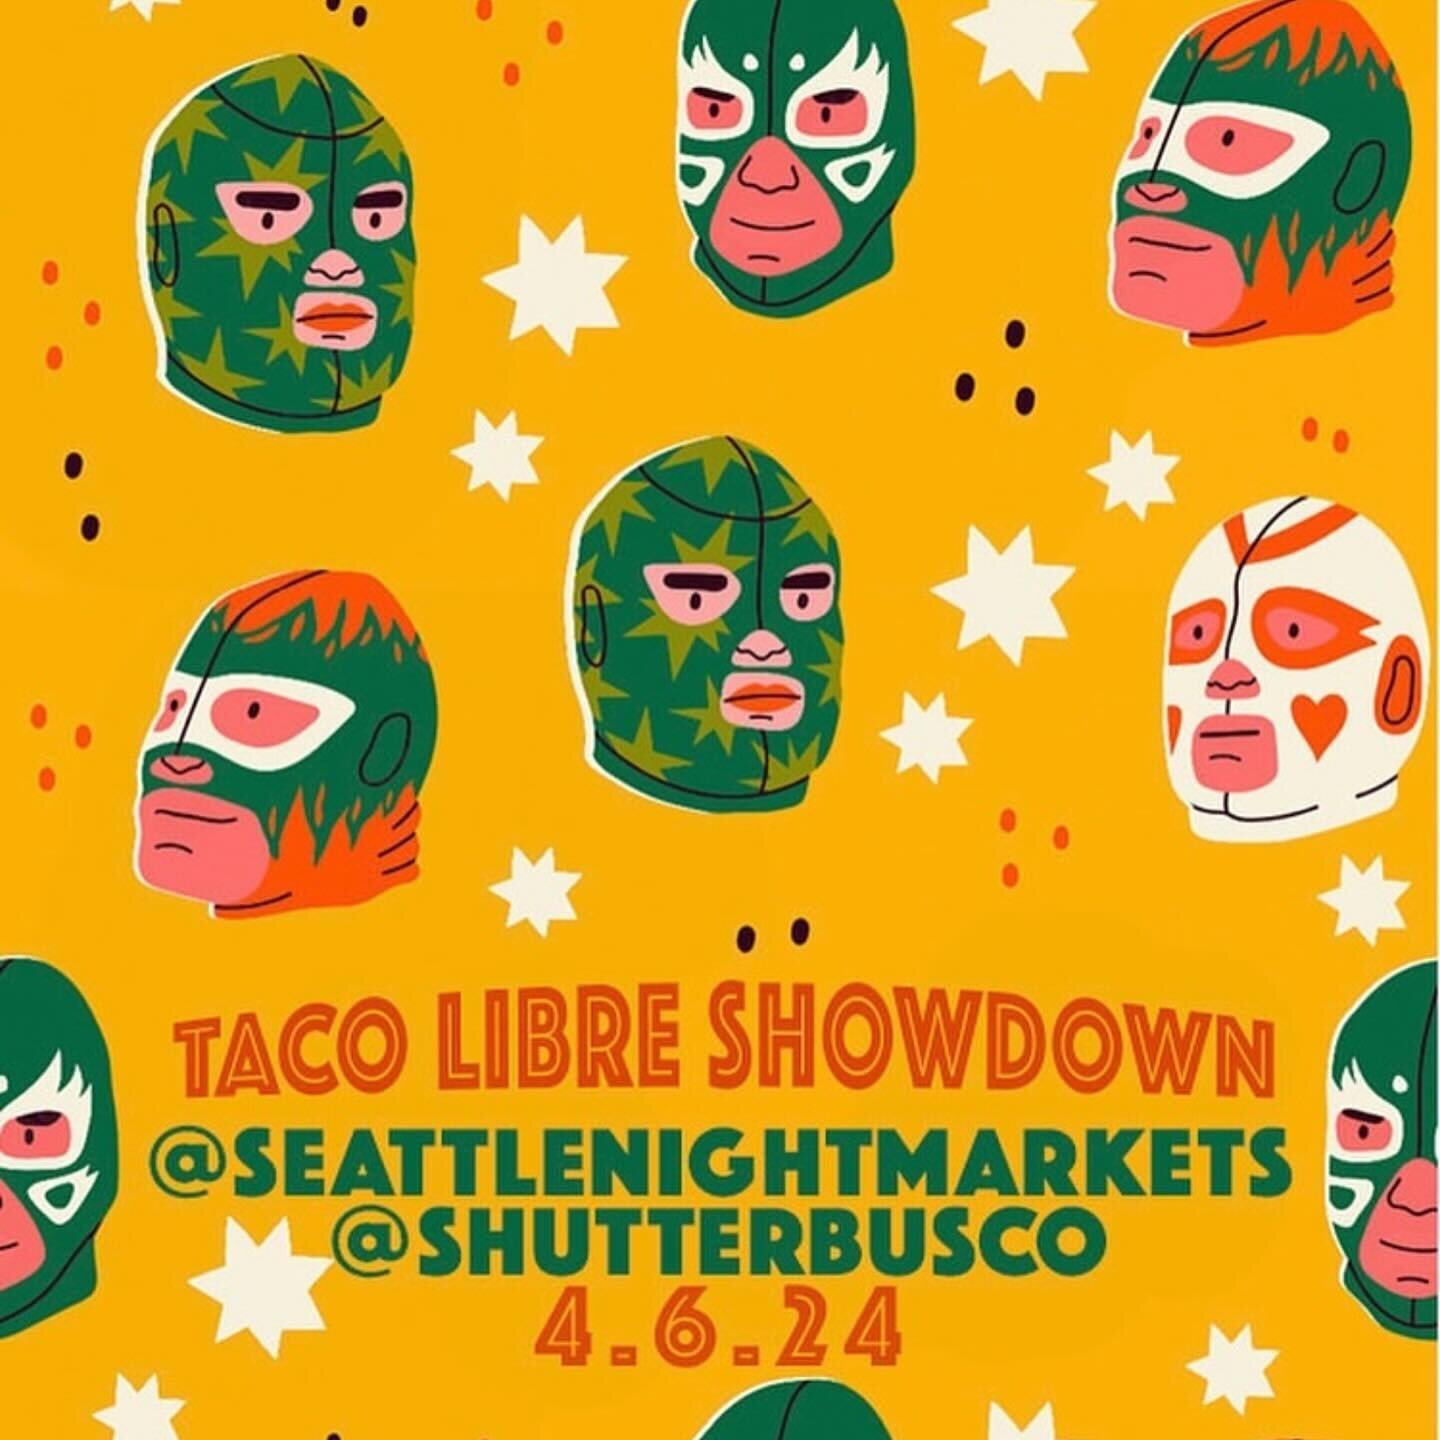 Get ready to rumble this Saturday at @seattlenightmarkets for TACO LIBRE SHOWDOWN with Luchador wrestling performances by @luchavolcanica and taco challenge by @mobilefoodrodeo ! 21+ and inside the Magnuson Park Hangar 30!